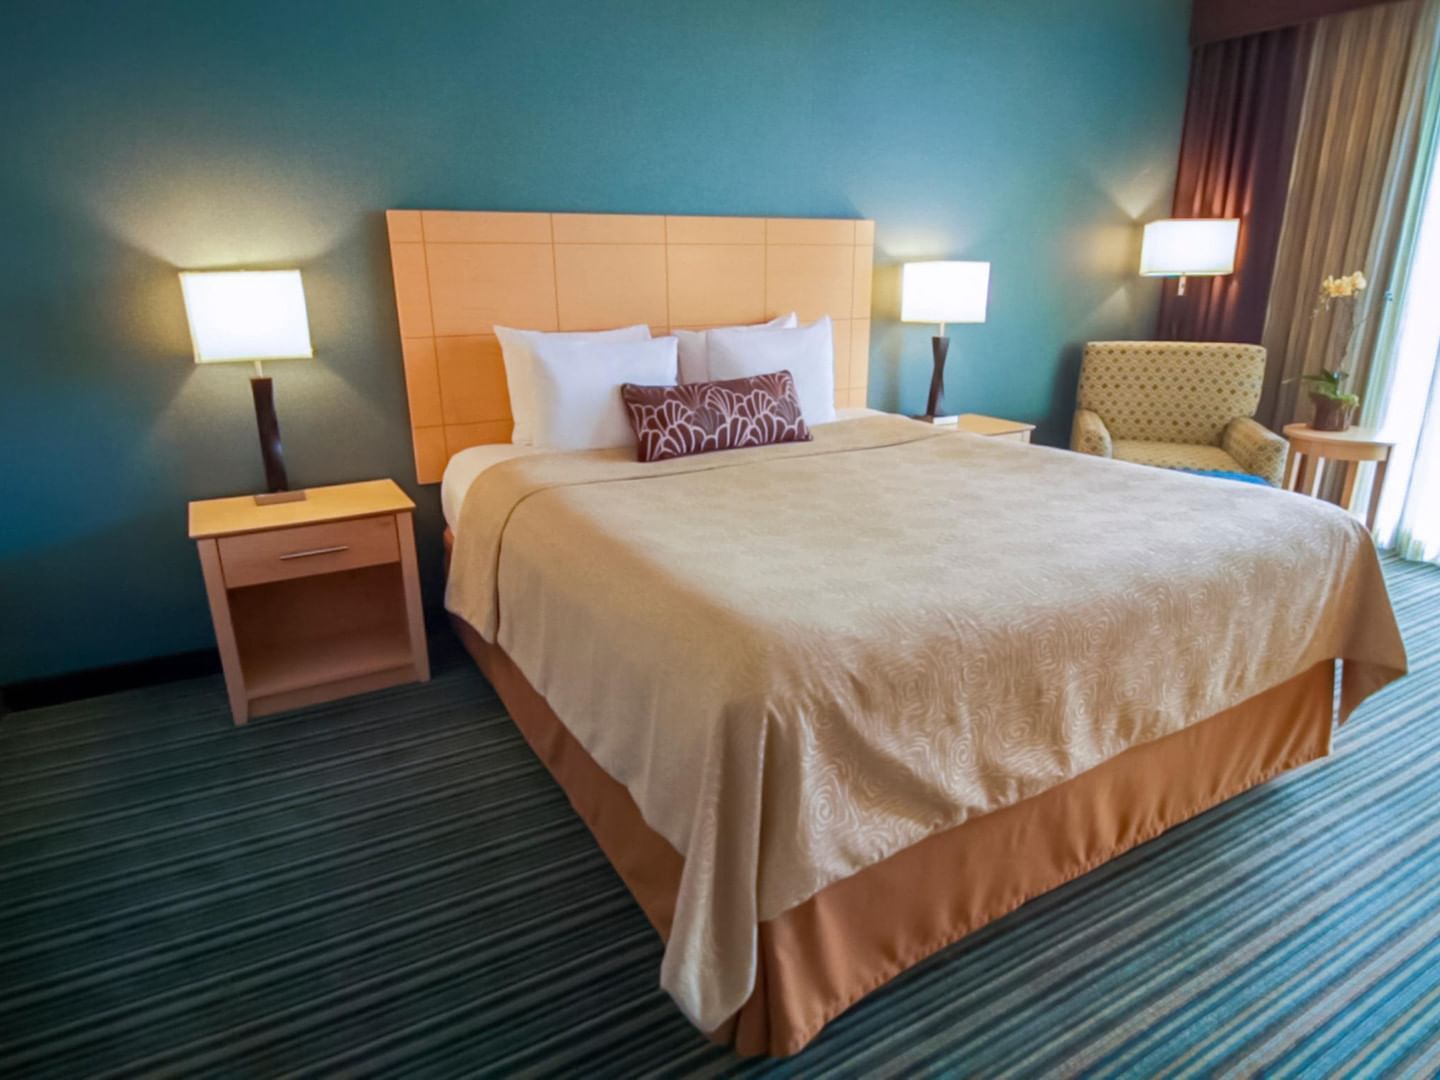 Bed, lounge & nightstands in a room, Inn by the Sea at La Jolla